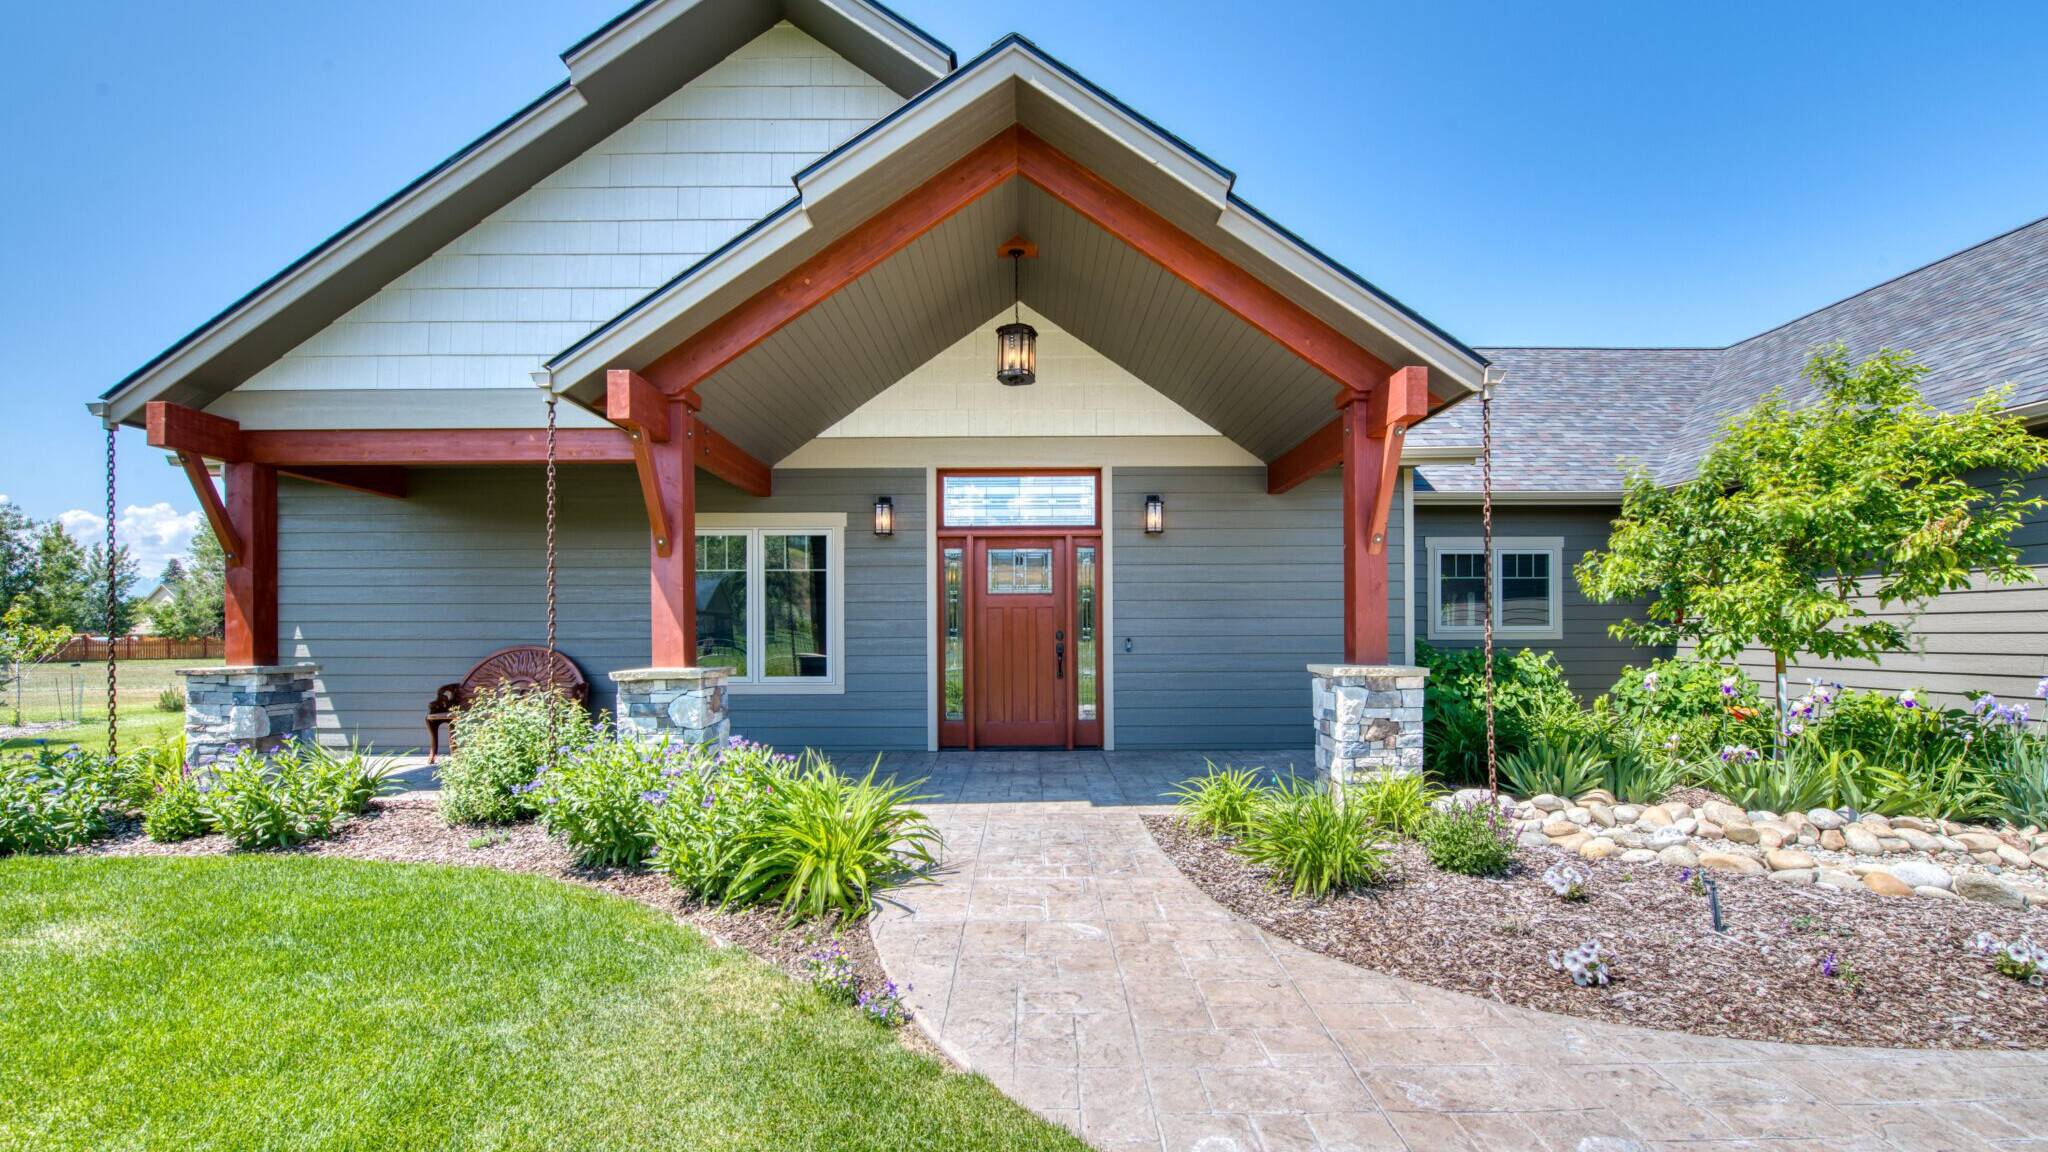 House exterior with a covered front porch with exposed beams in a custom home by Big Sky Builders in Hamilton, MT.